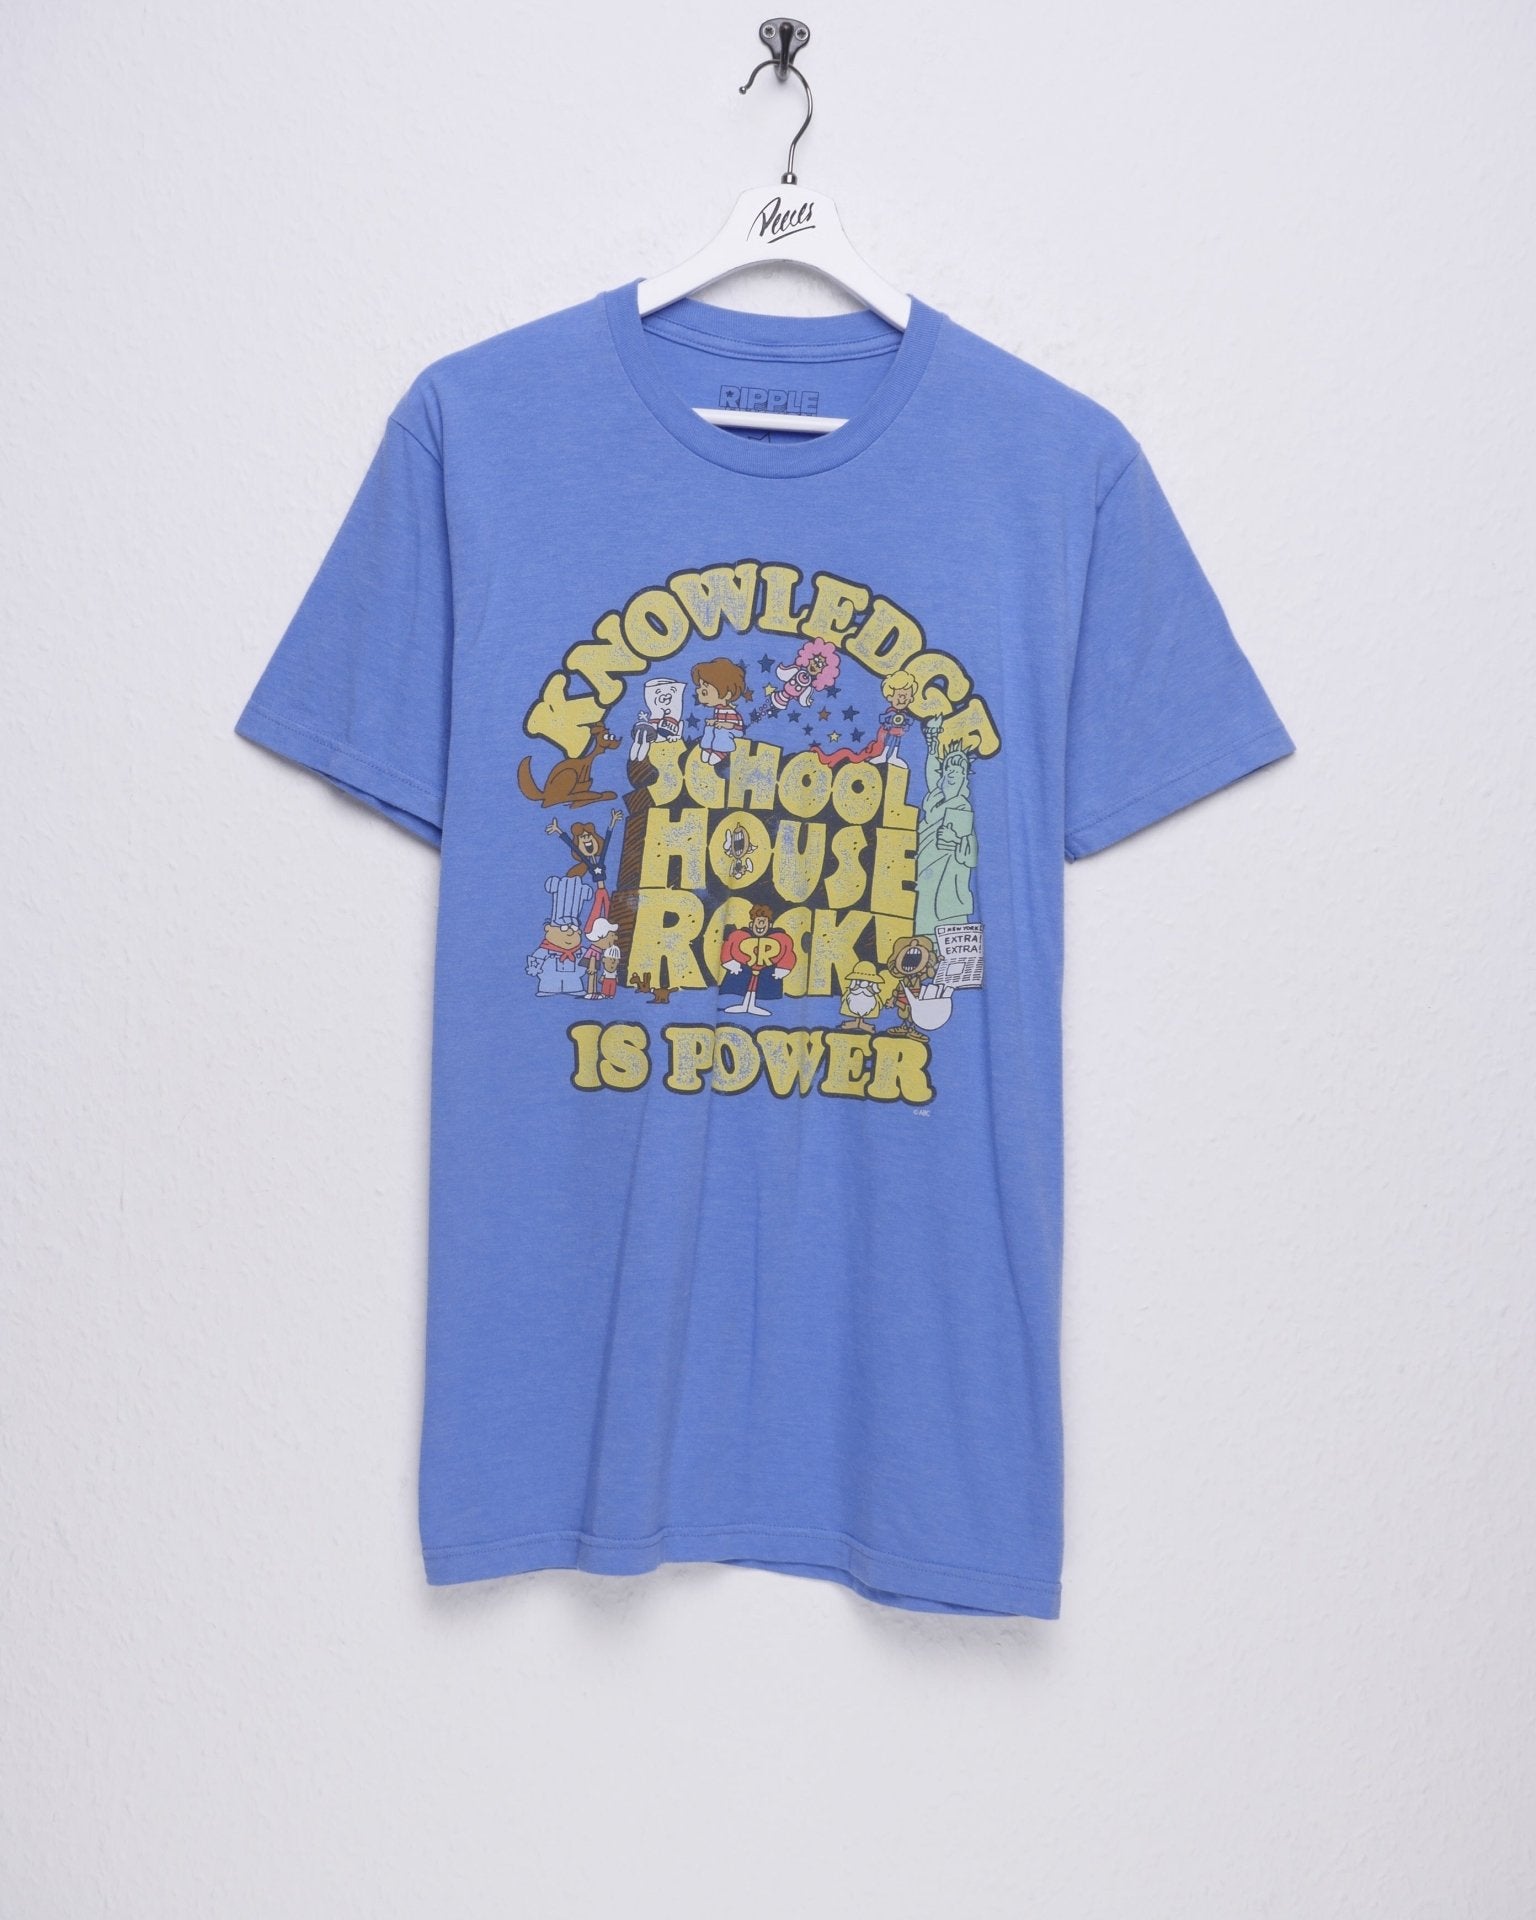 Knowledge is Power printed Graphic Vintage Shirt - Peeces